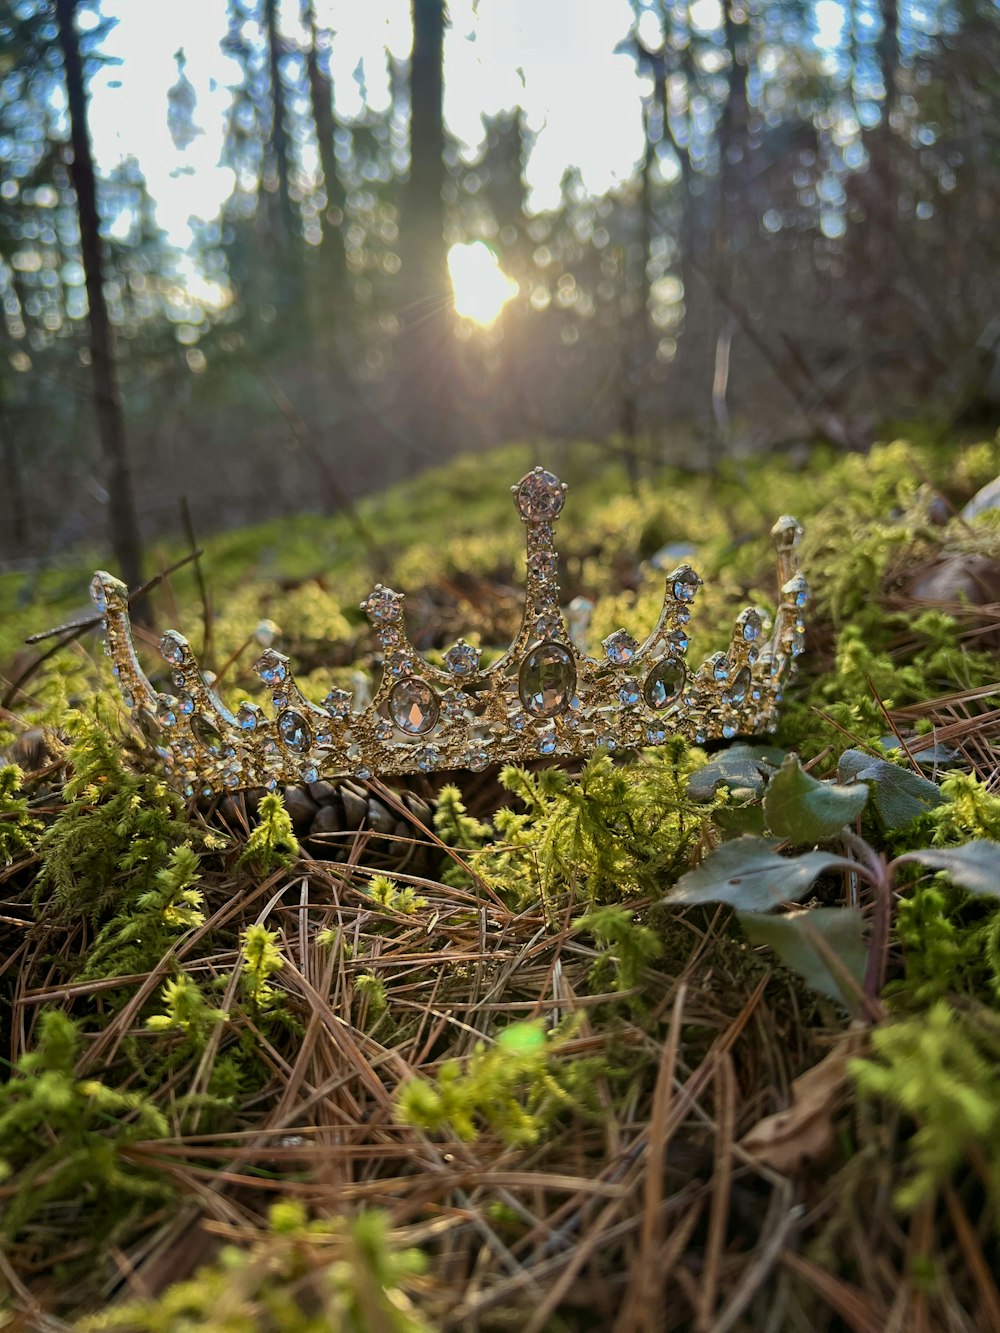 a tiara sitting on the ground in the woods